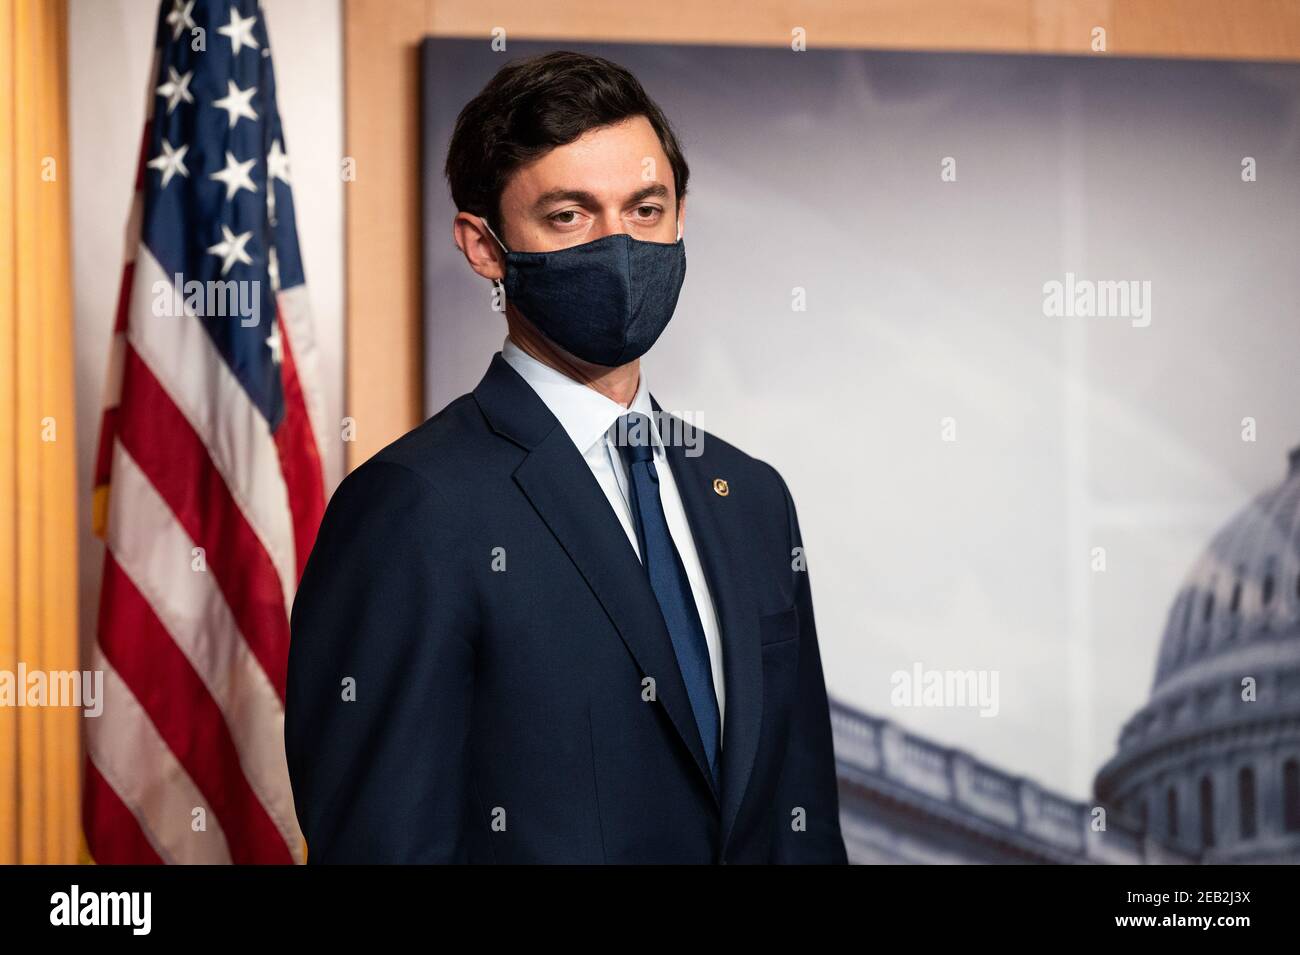 U.S. Senator, Jon Ossoff (D-GA) at a press conference  about the COVID-19 relief legislation being worked on in the Senate. Stock Photo